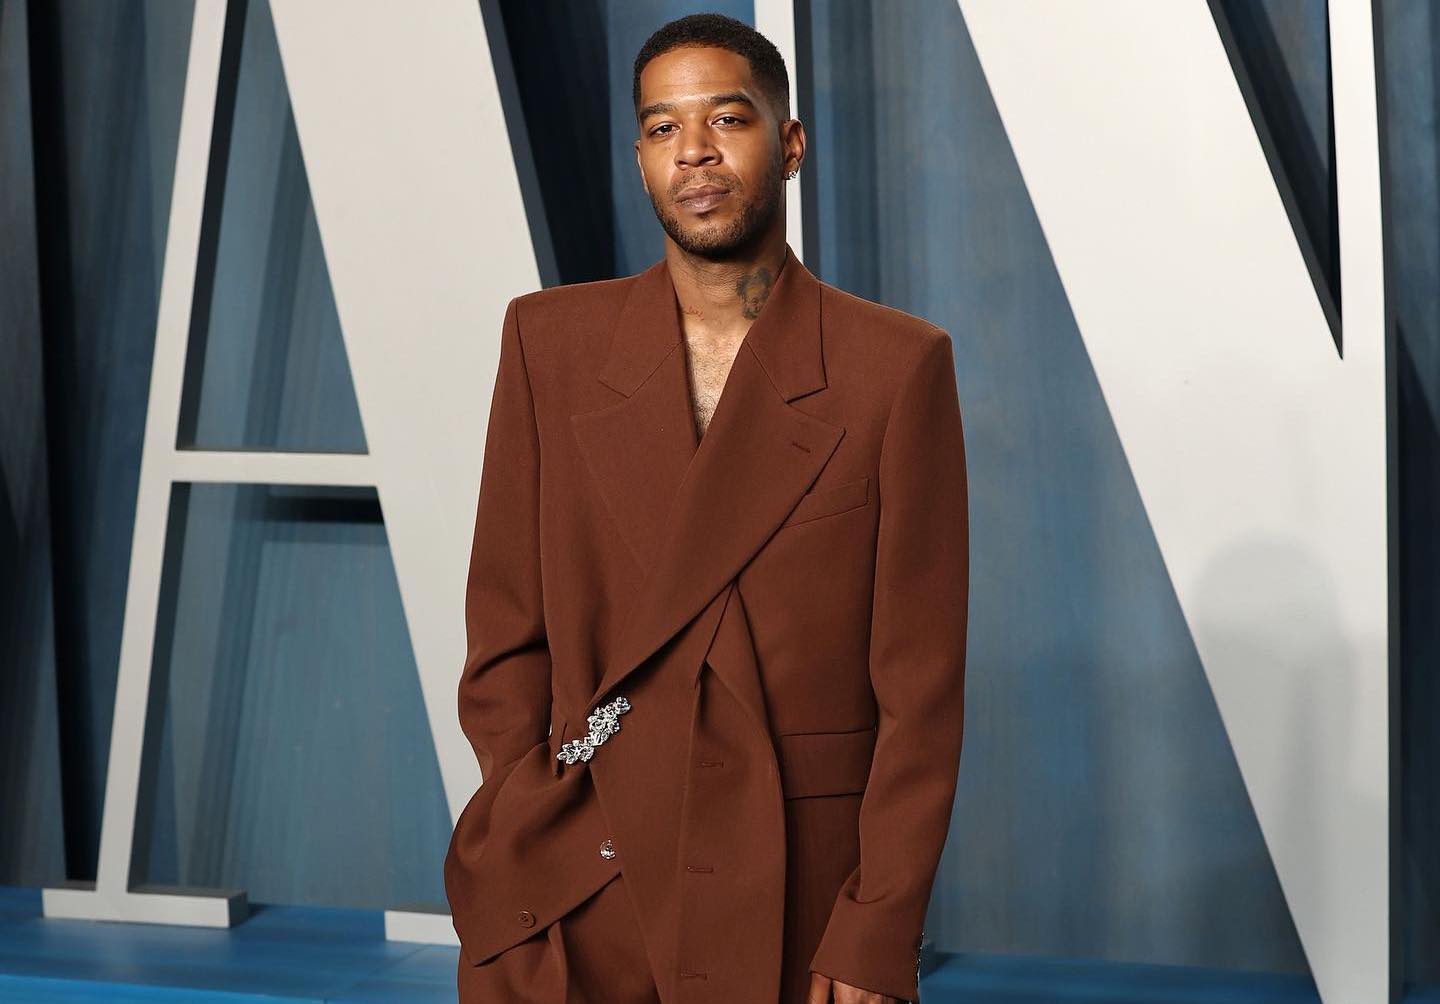 SPOTTED: Kid Cudi Attends the Oscars Vanity Fair Afterparty in Louis Vuitton